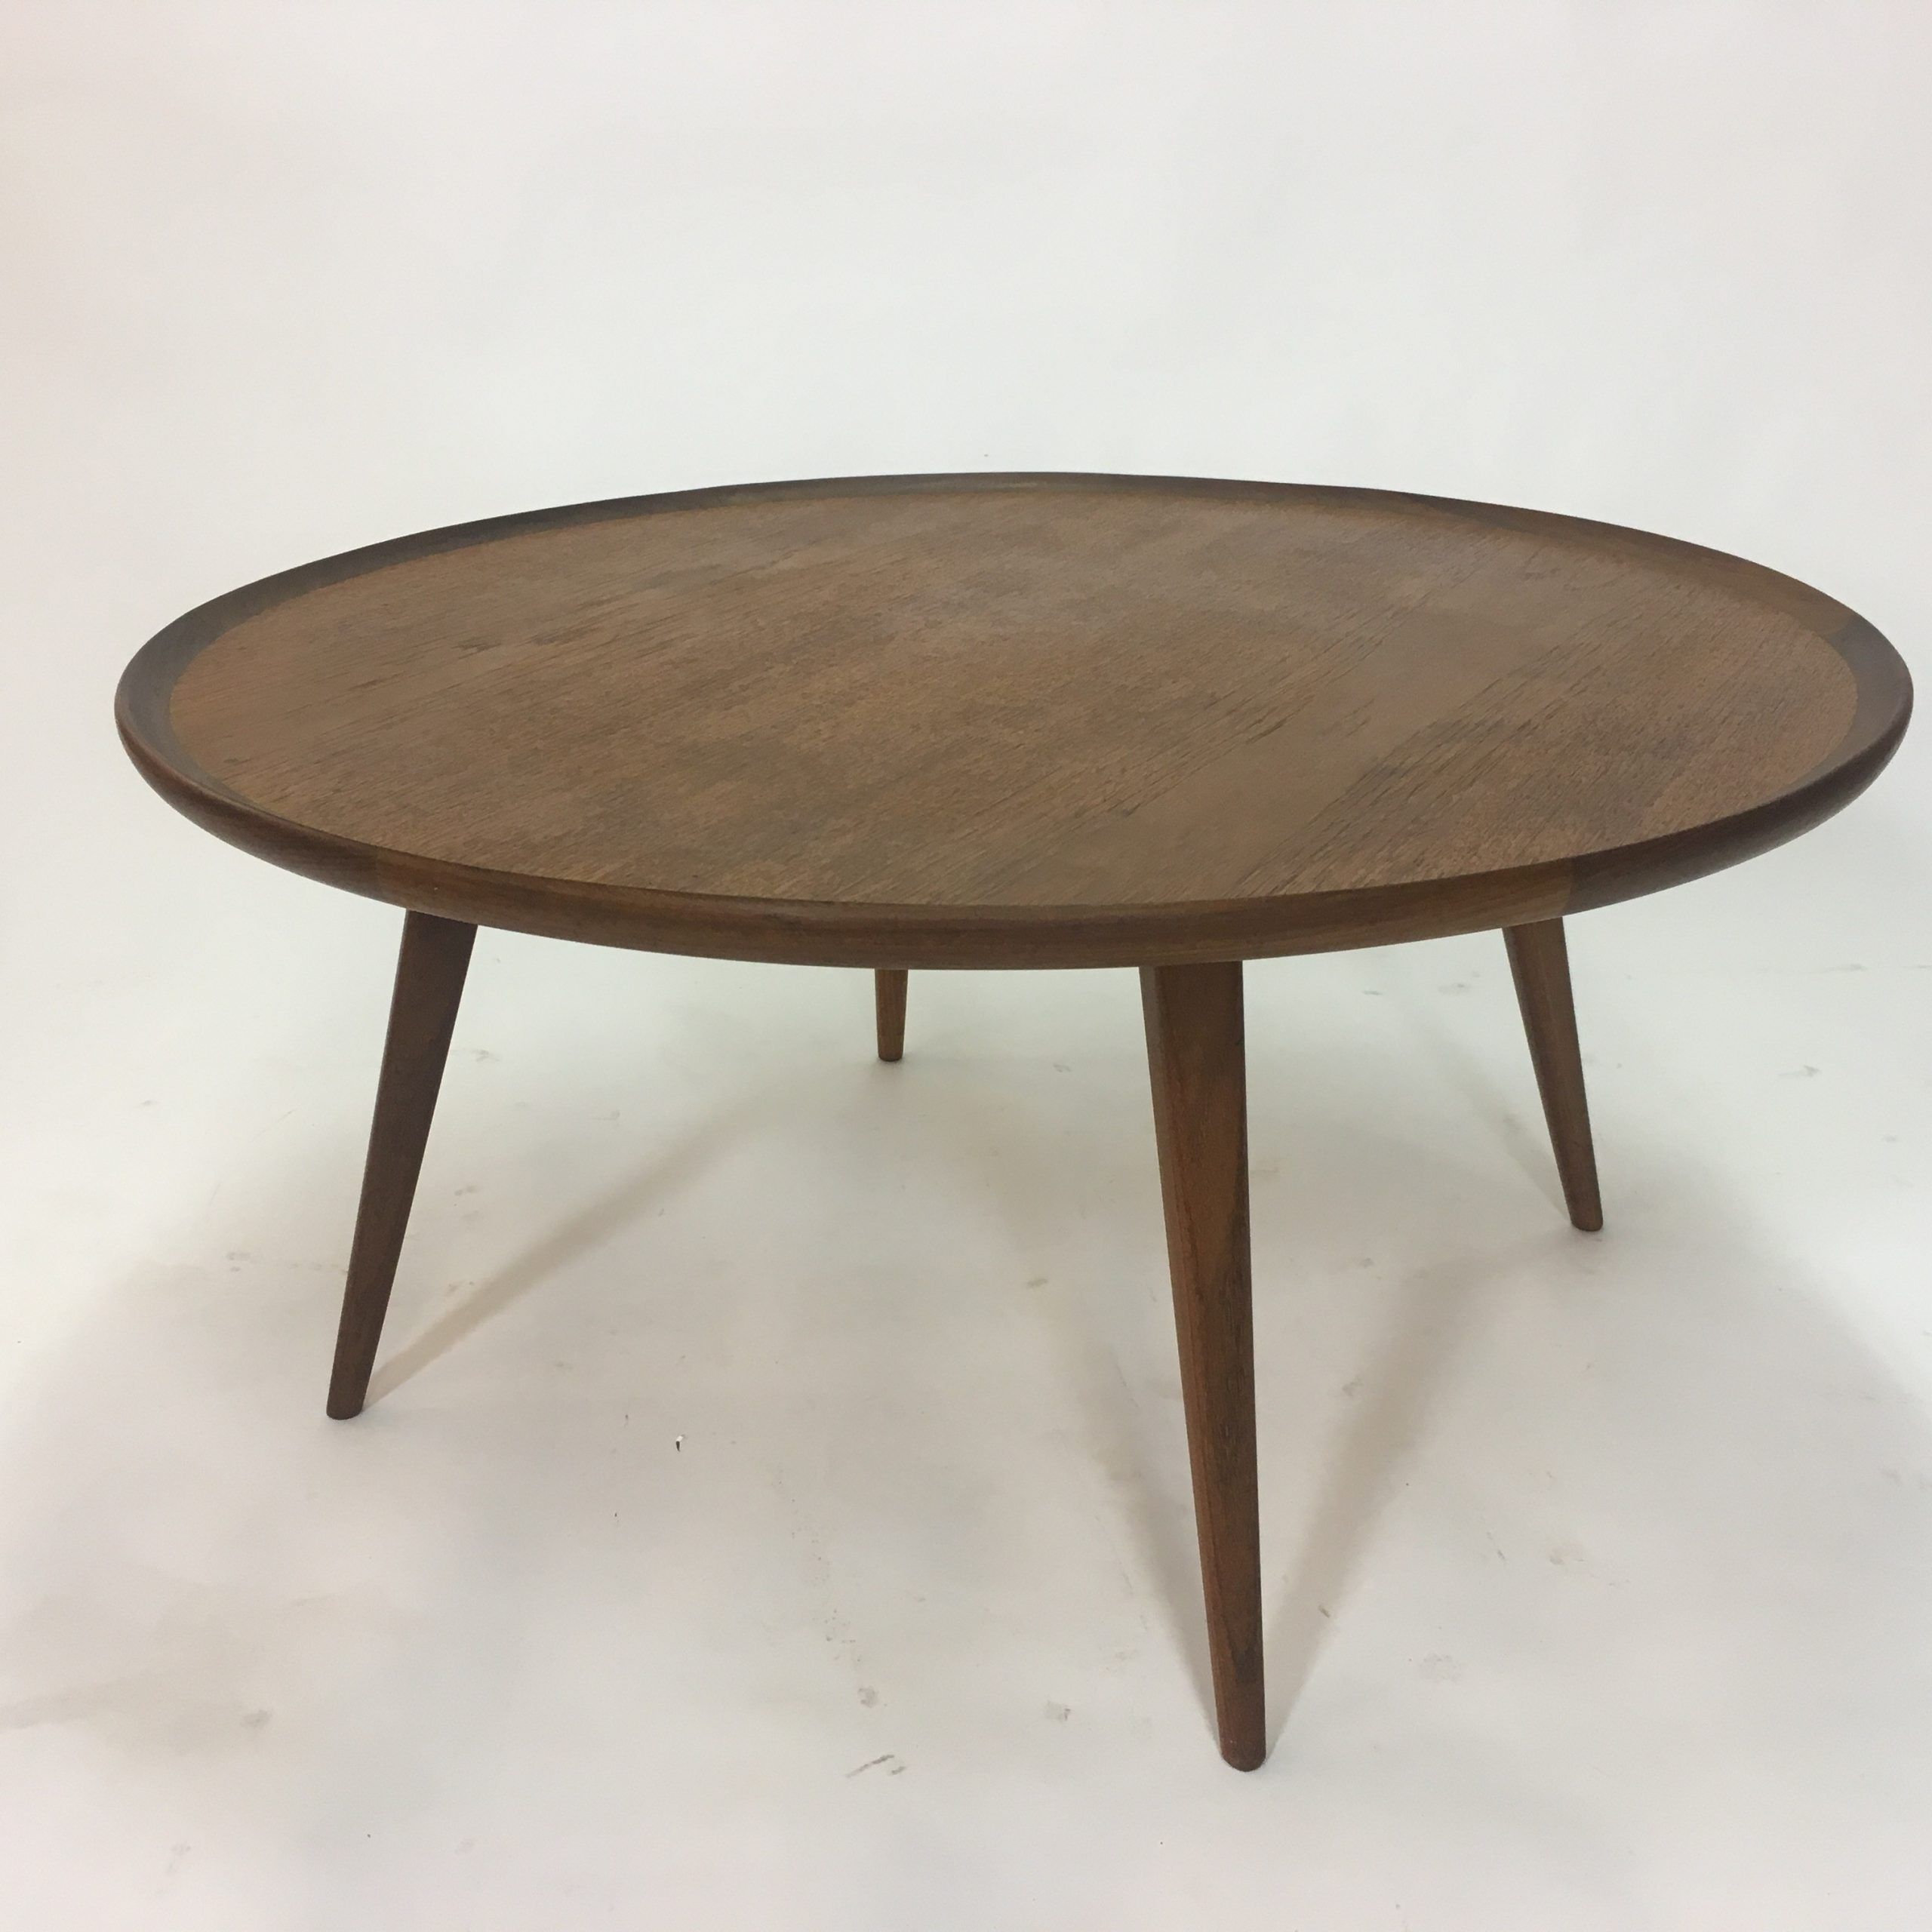 Best And Newest Vintage Round Teak Coffee Table – 1950s – Design Market Inside Round Coffee Tables (View 5 of 10)